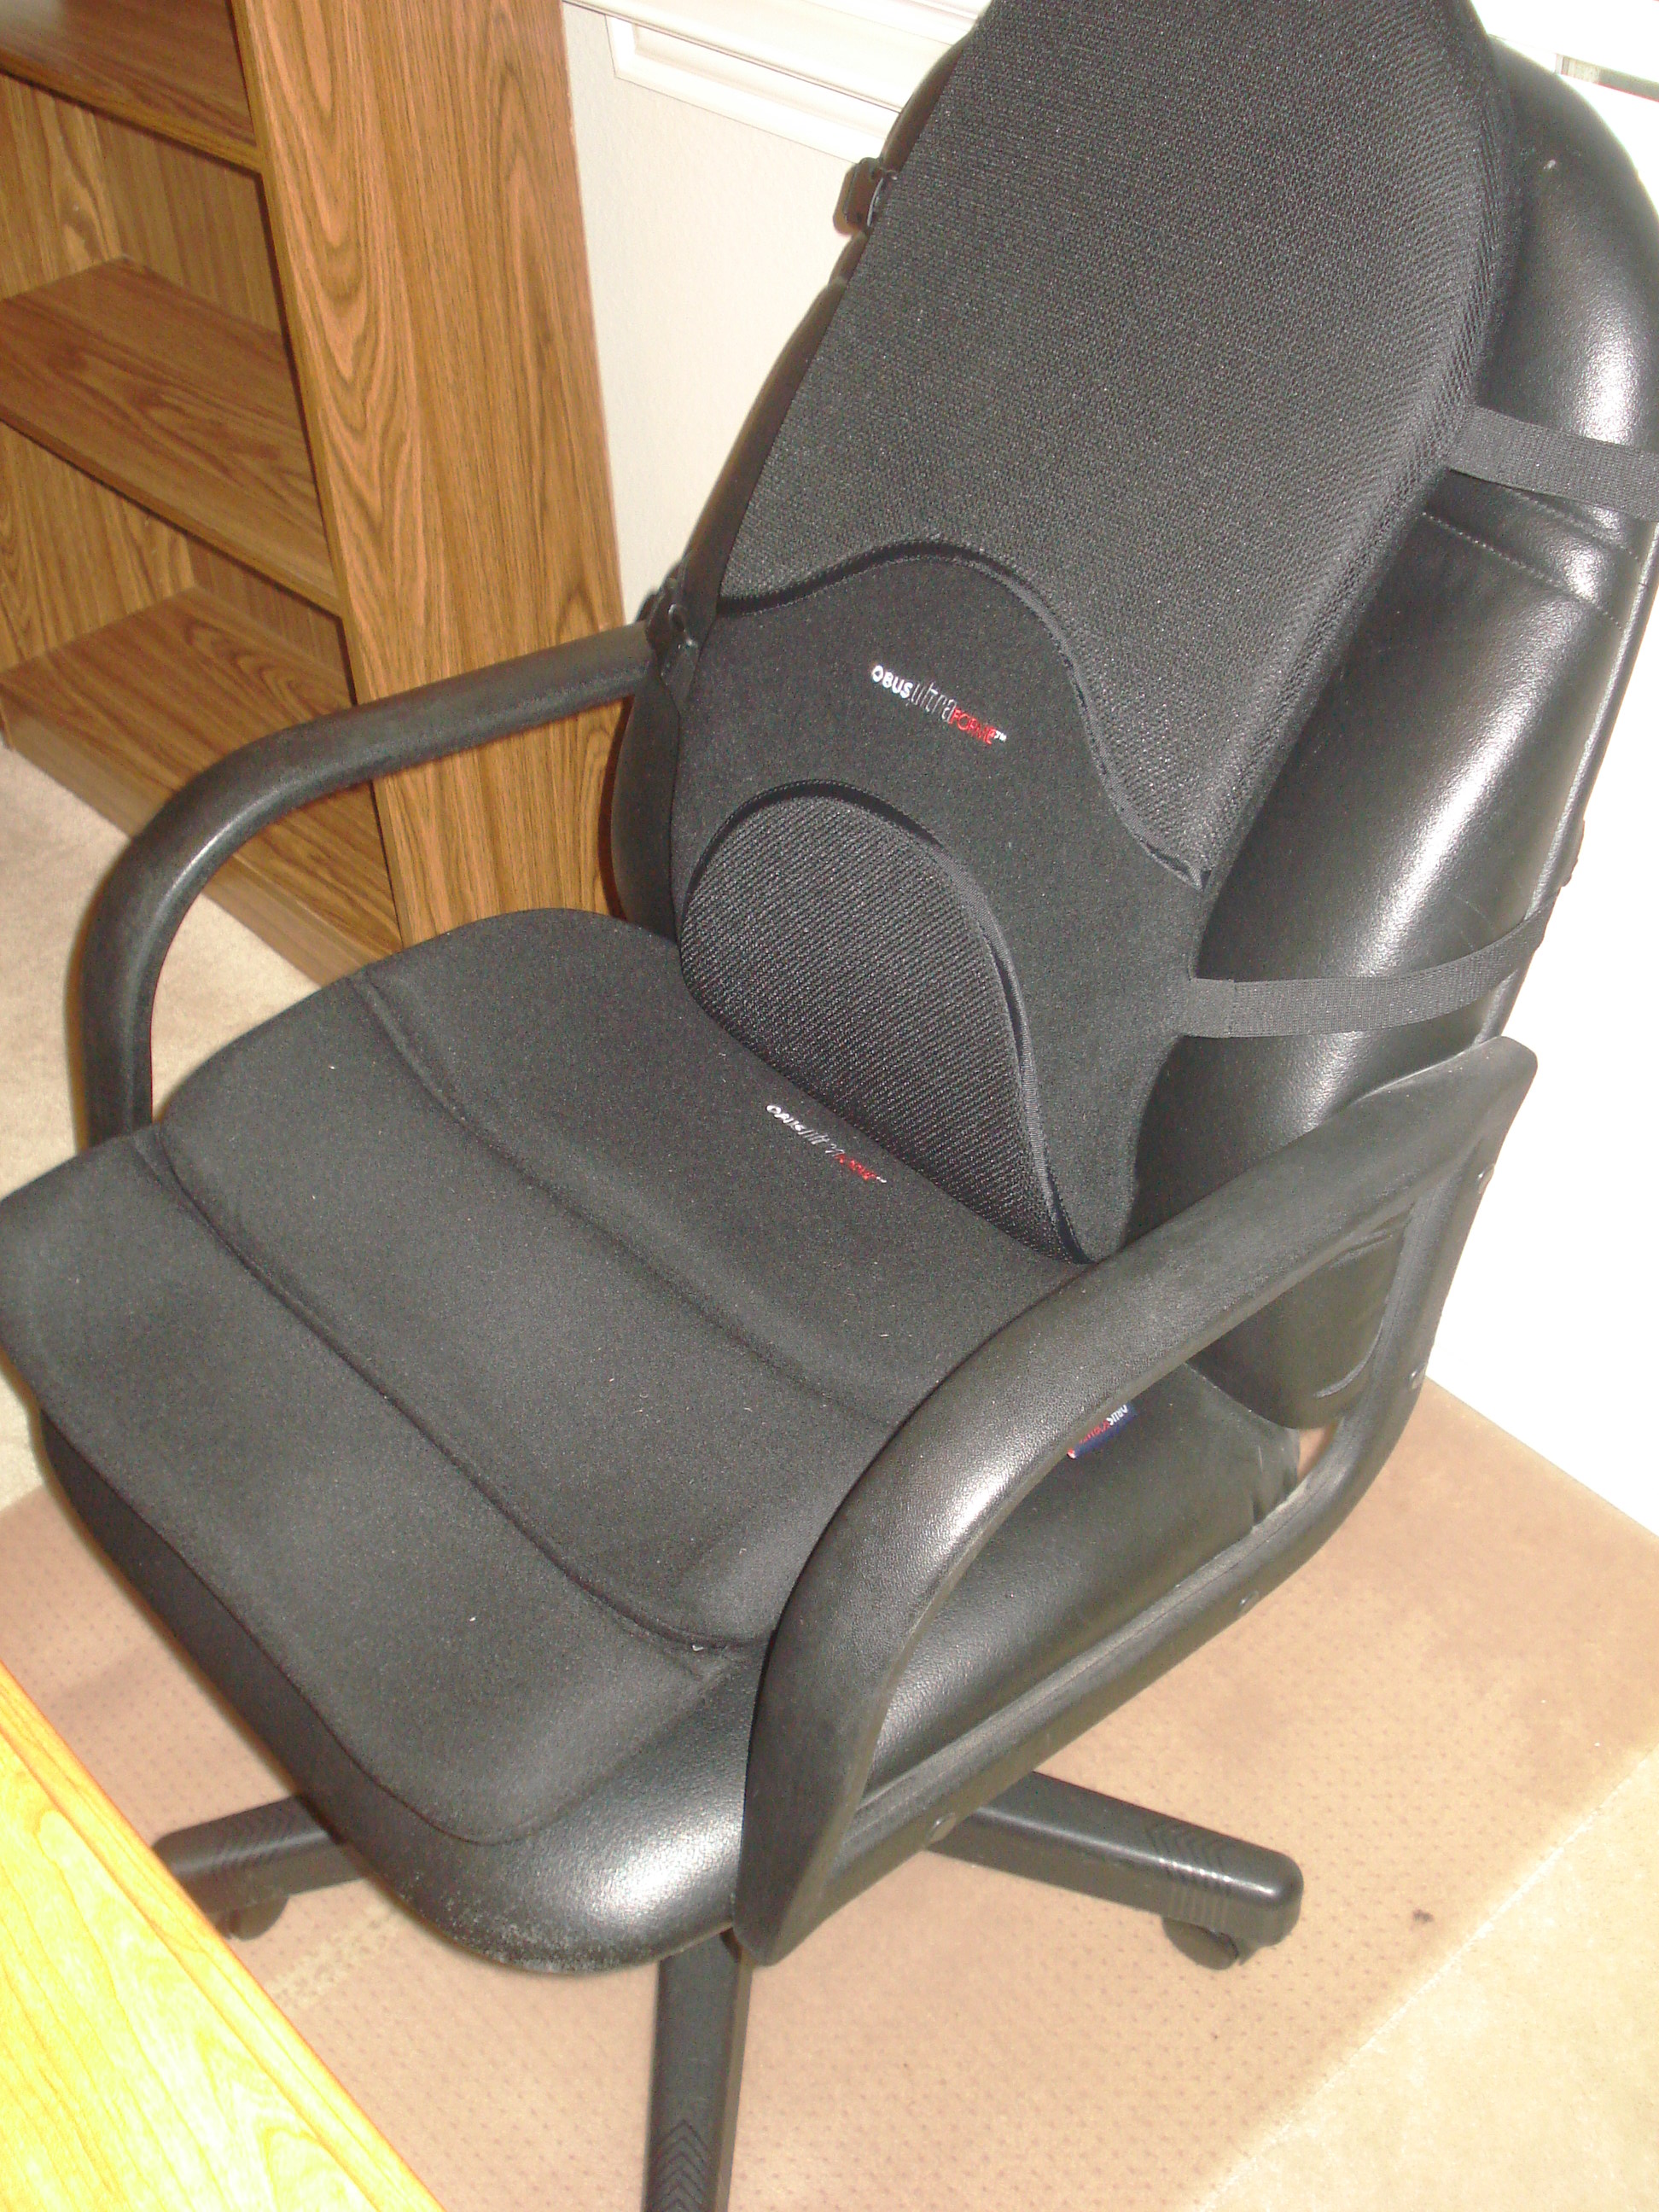 Obusforme seat cushion and back support, cure for uncomfortable xfire  seats!!! - CrossfireForum - The Chrysler Crossfire and SRT6 Resource